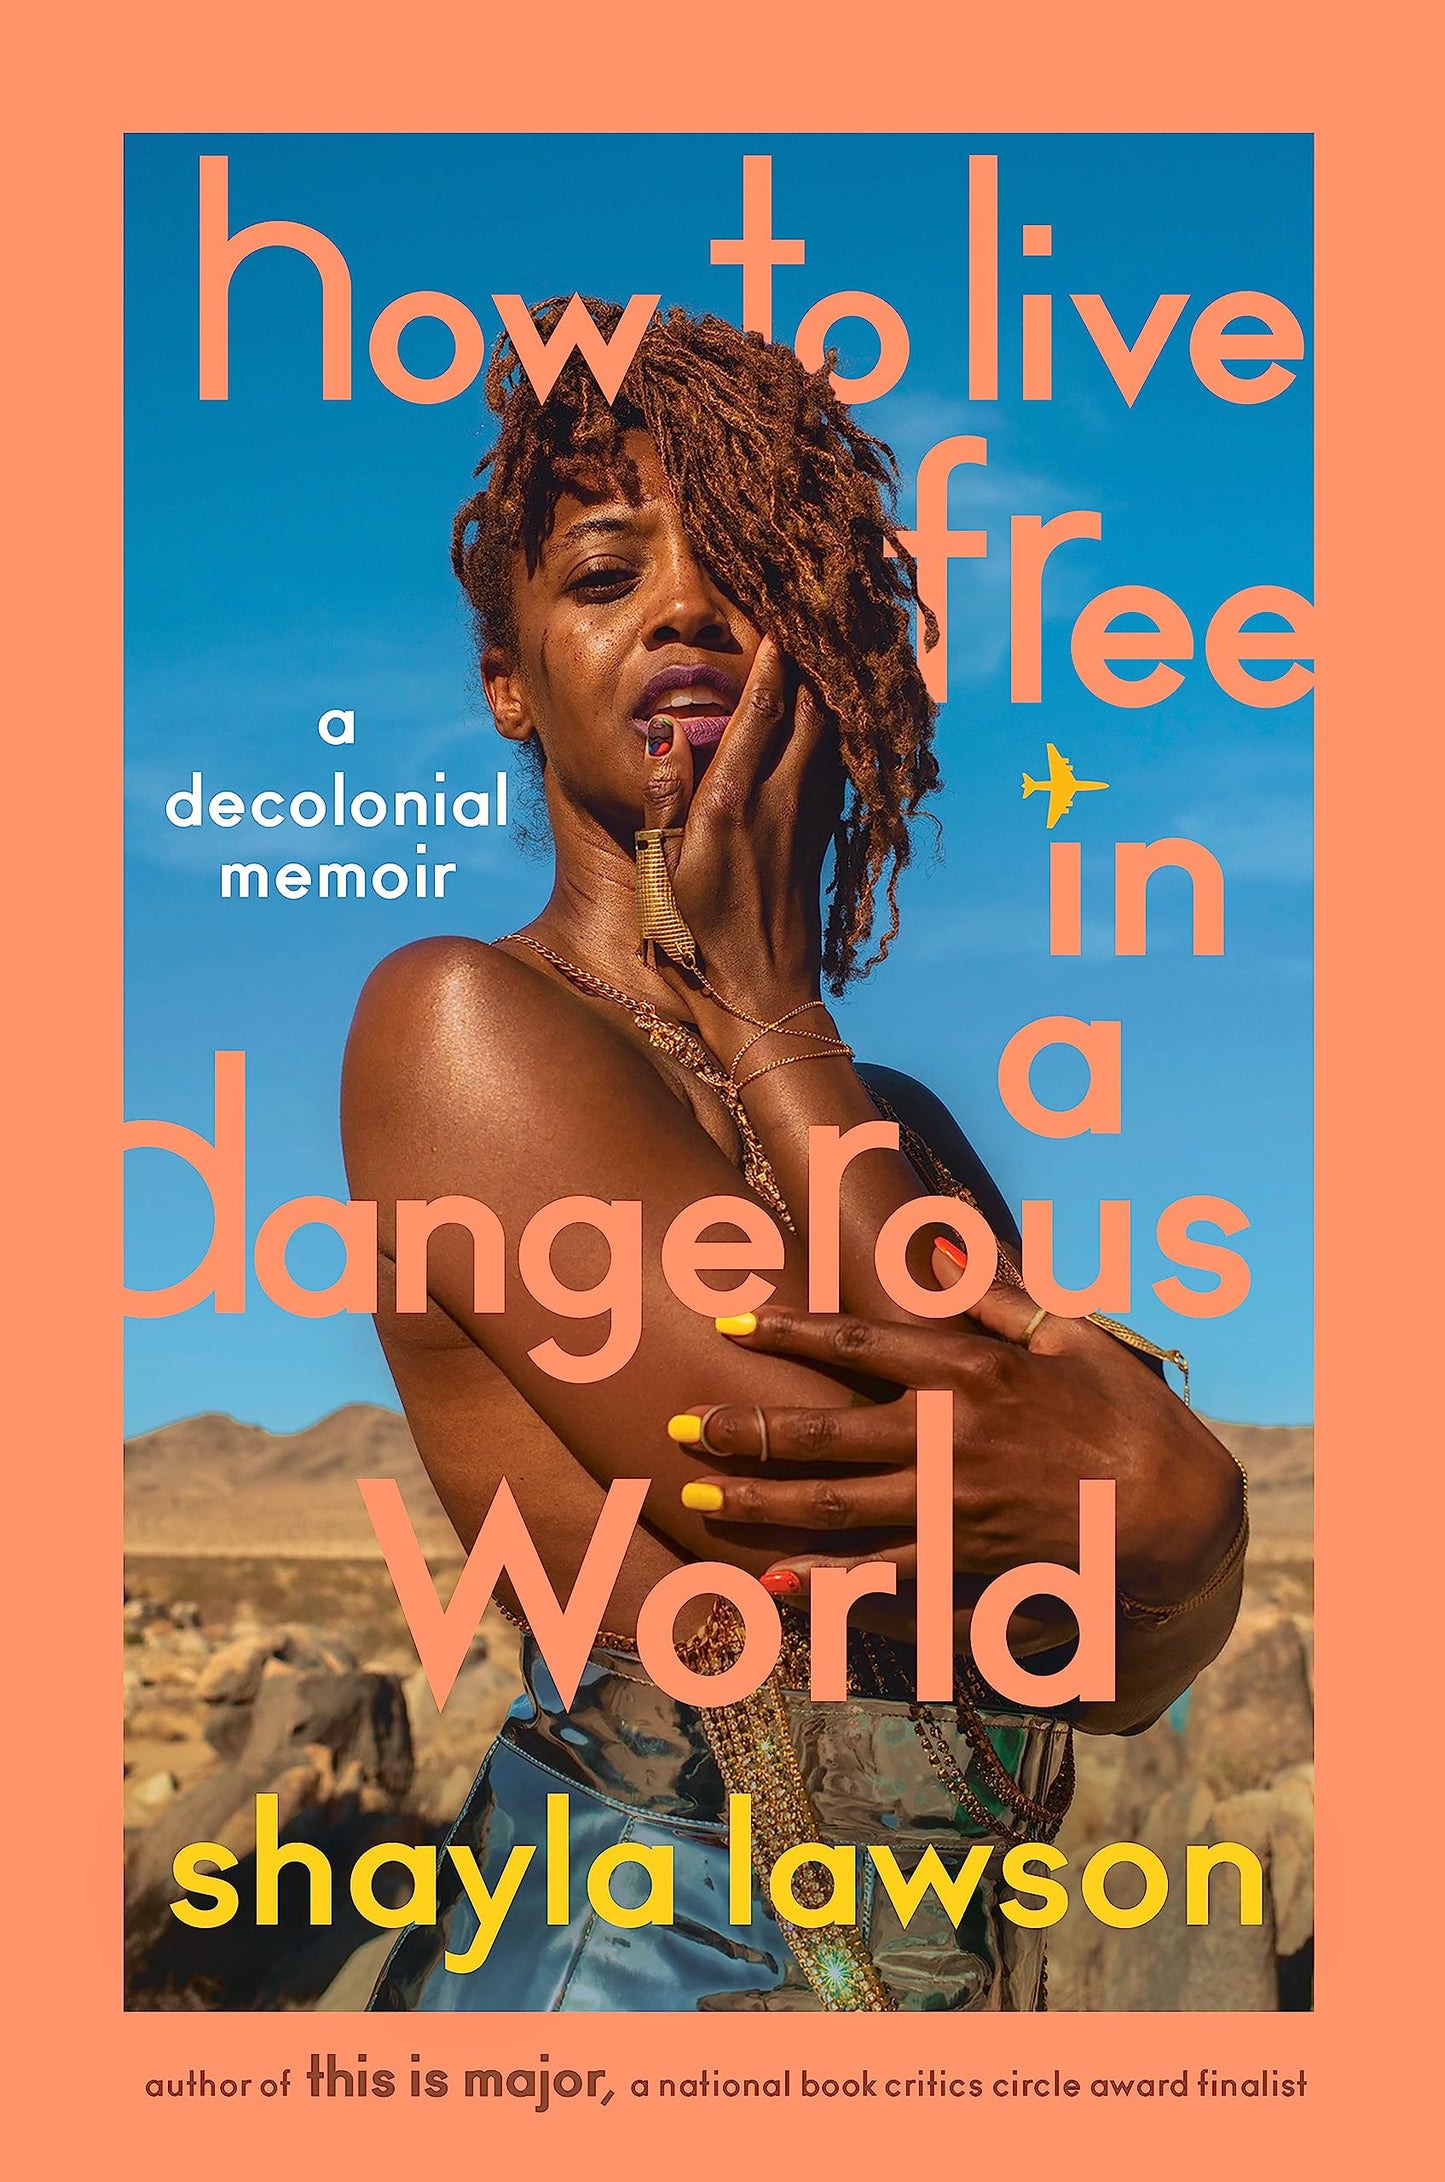 How to Live Free in a Dangerous World // A Decolonial Memoir